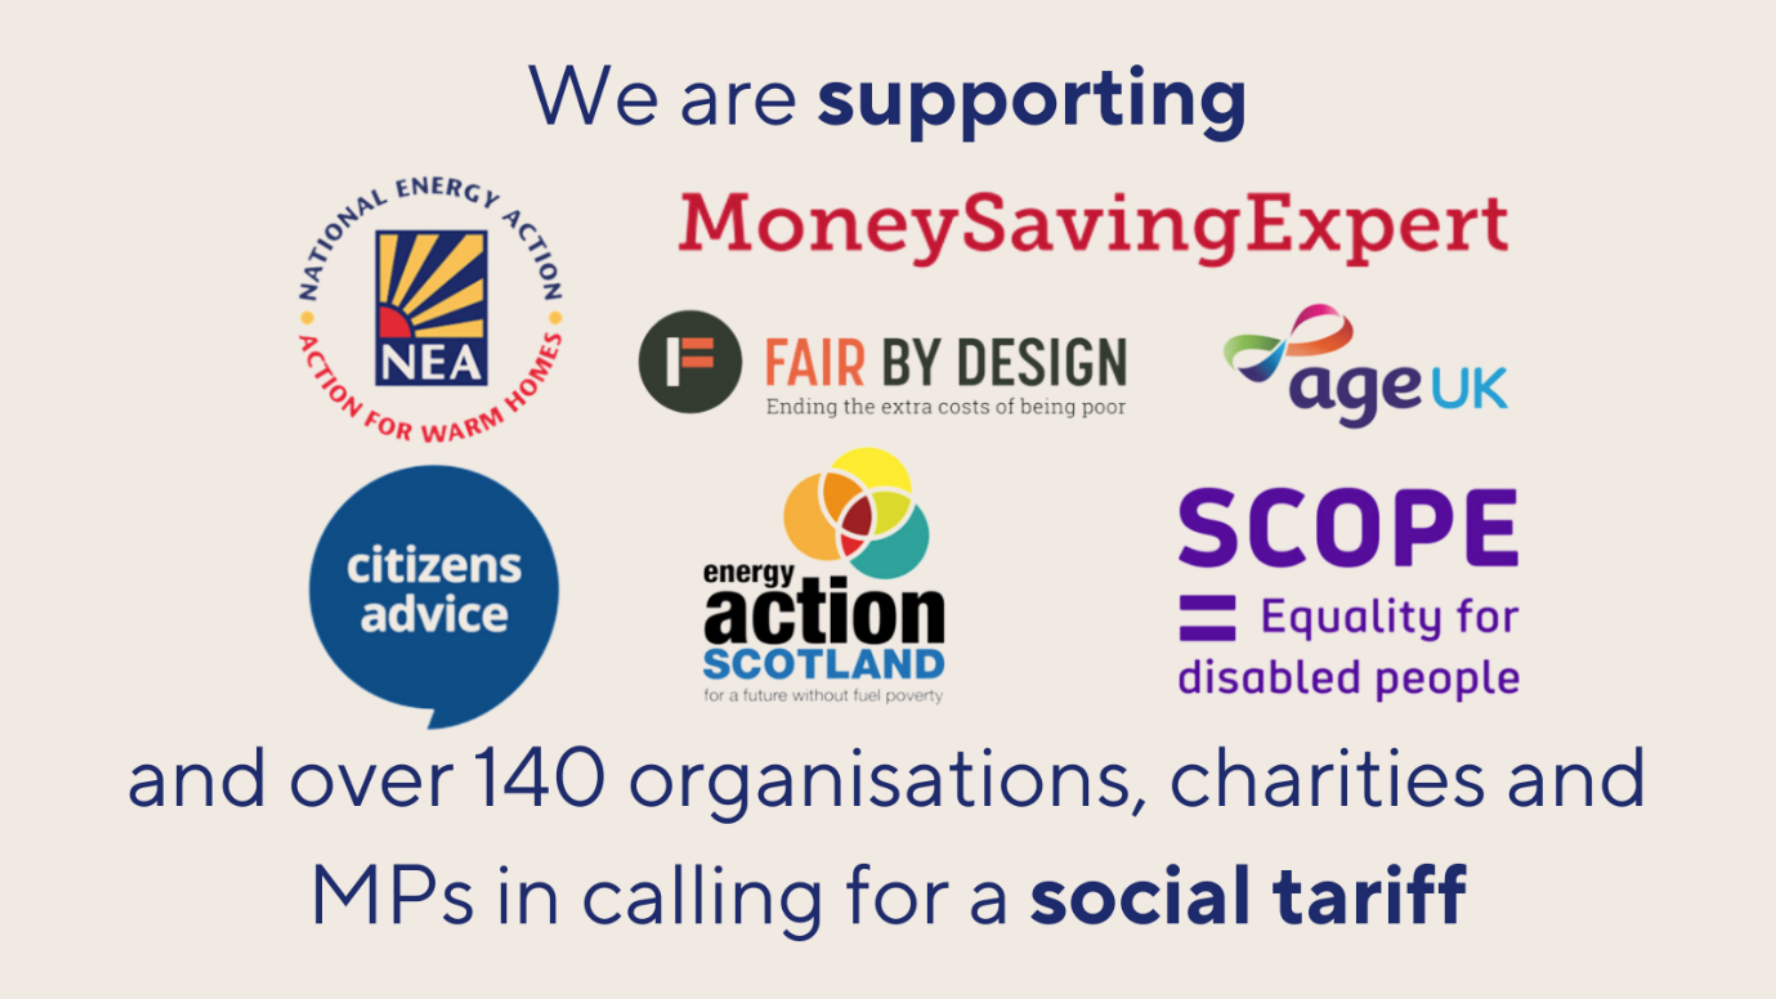 We are supporting Citizens Advice, Age UK, Scope, National Energy Action, Money Saving Expert, and Fair By Design and over 140 organisations, charities and MPs in calling for a social tariff